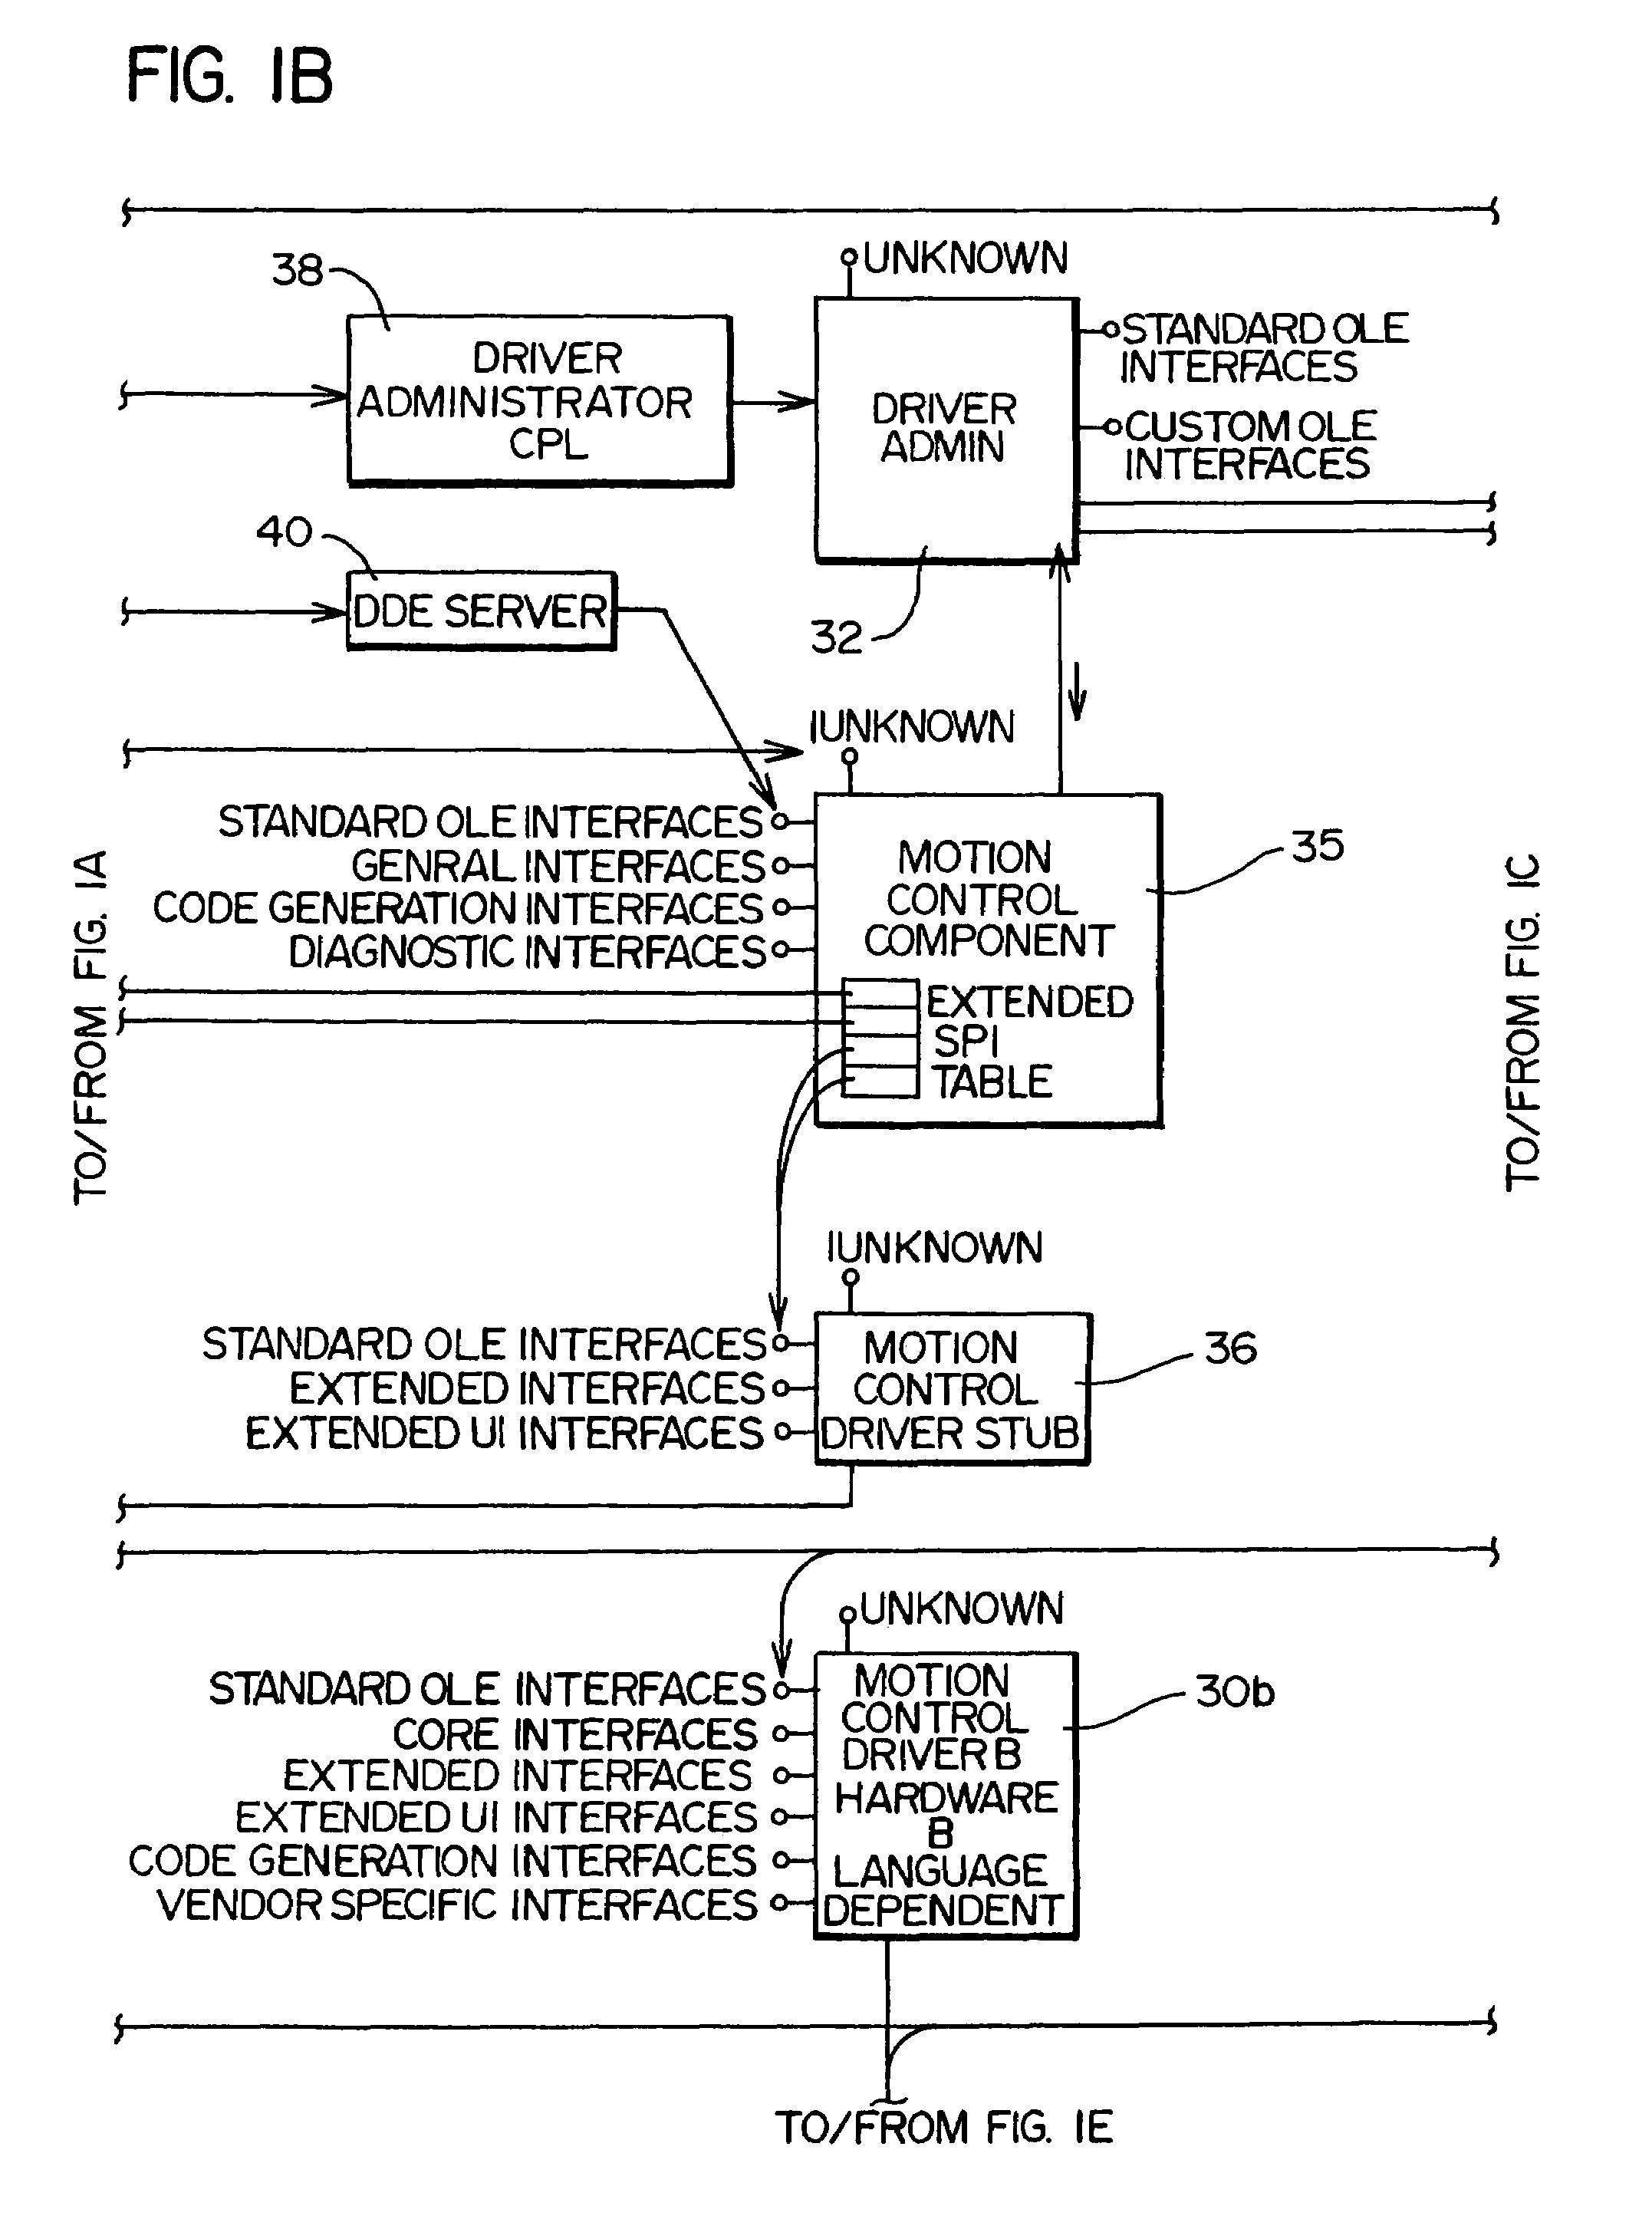 Access control systems and methods for motion control